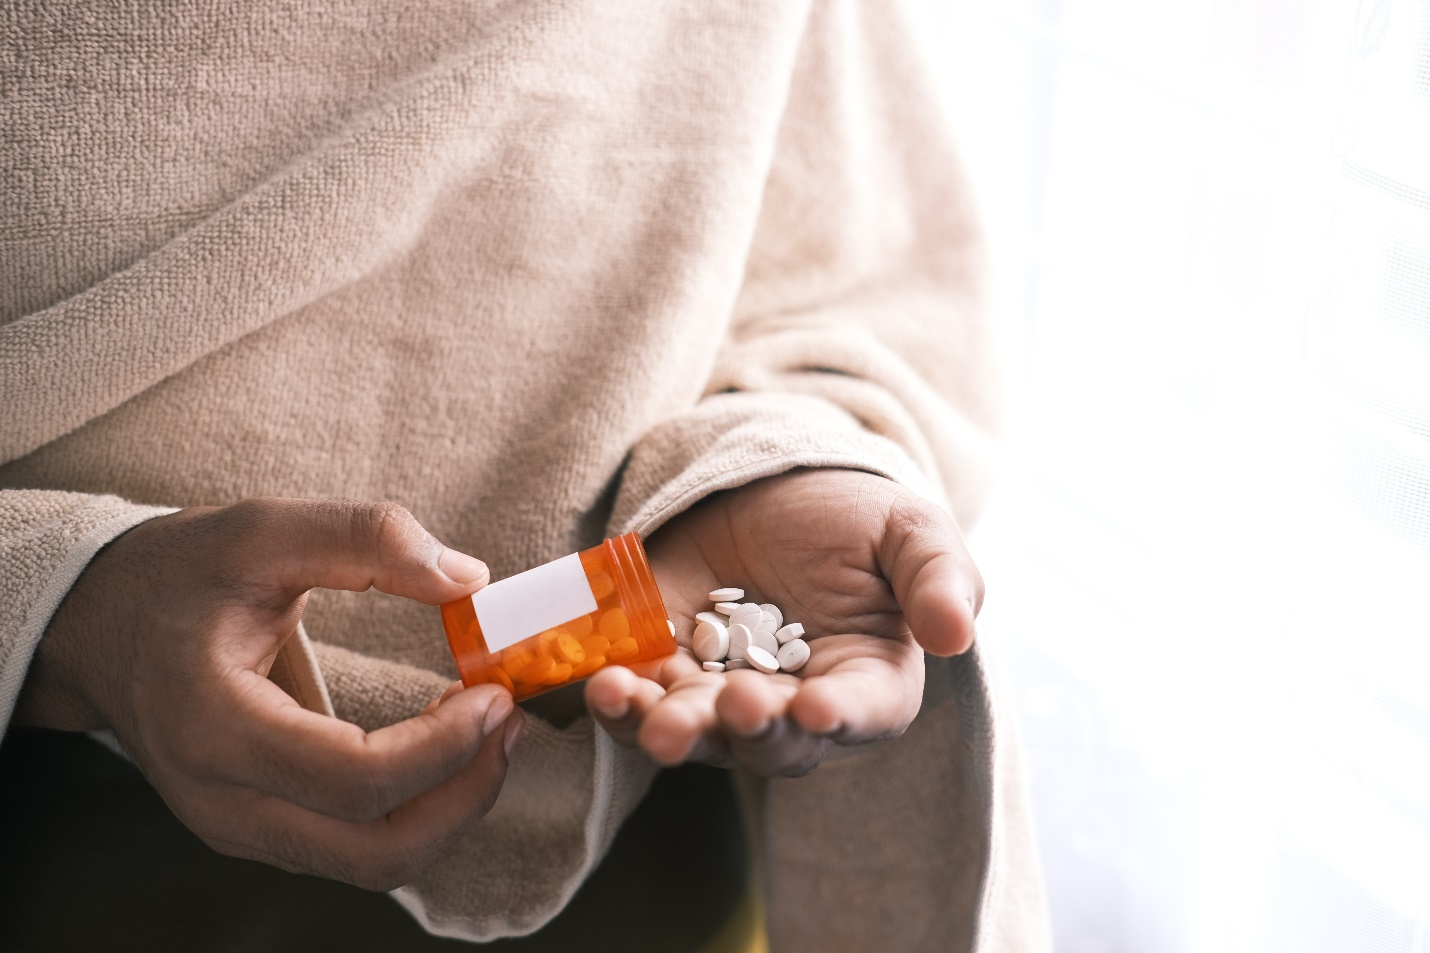 A person piling pills in their hands from an orange pill bottle